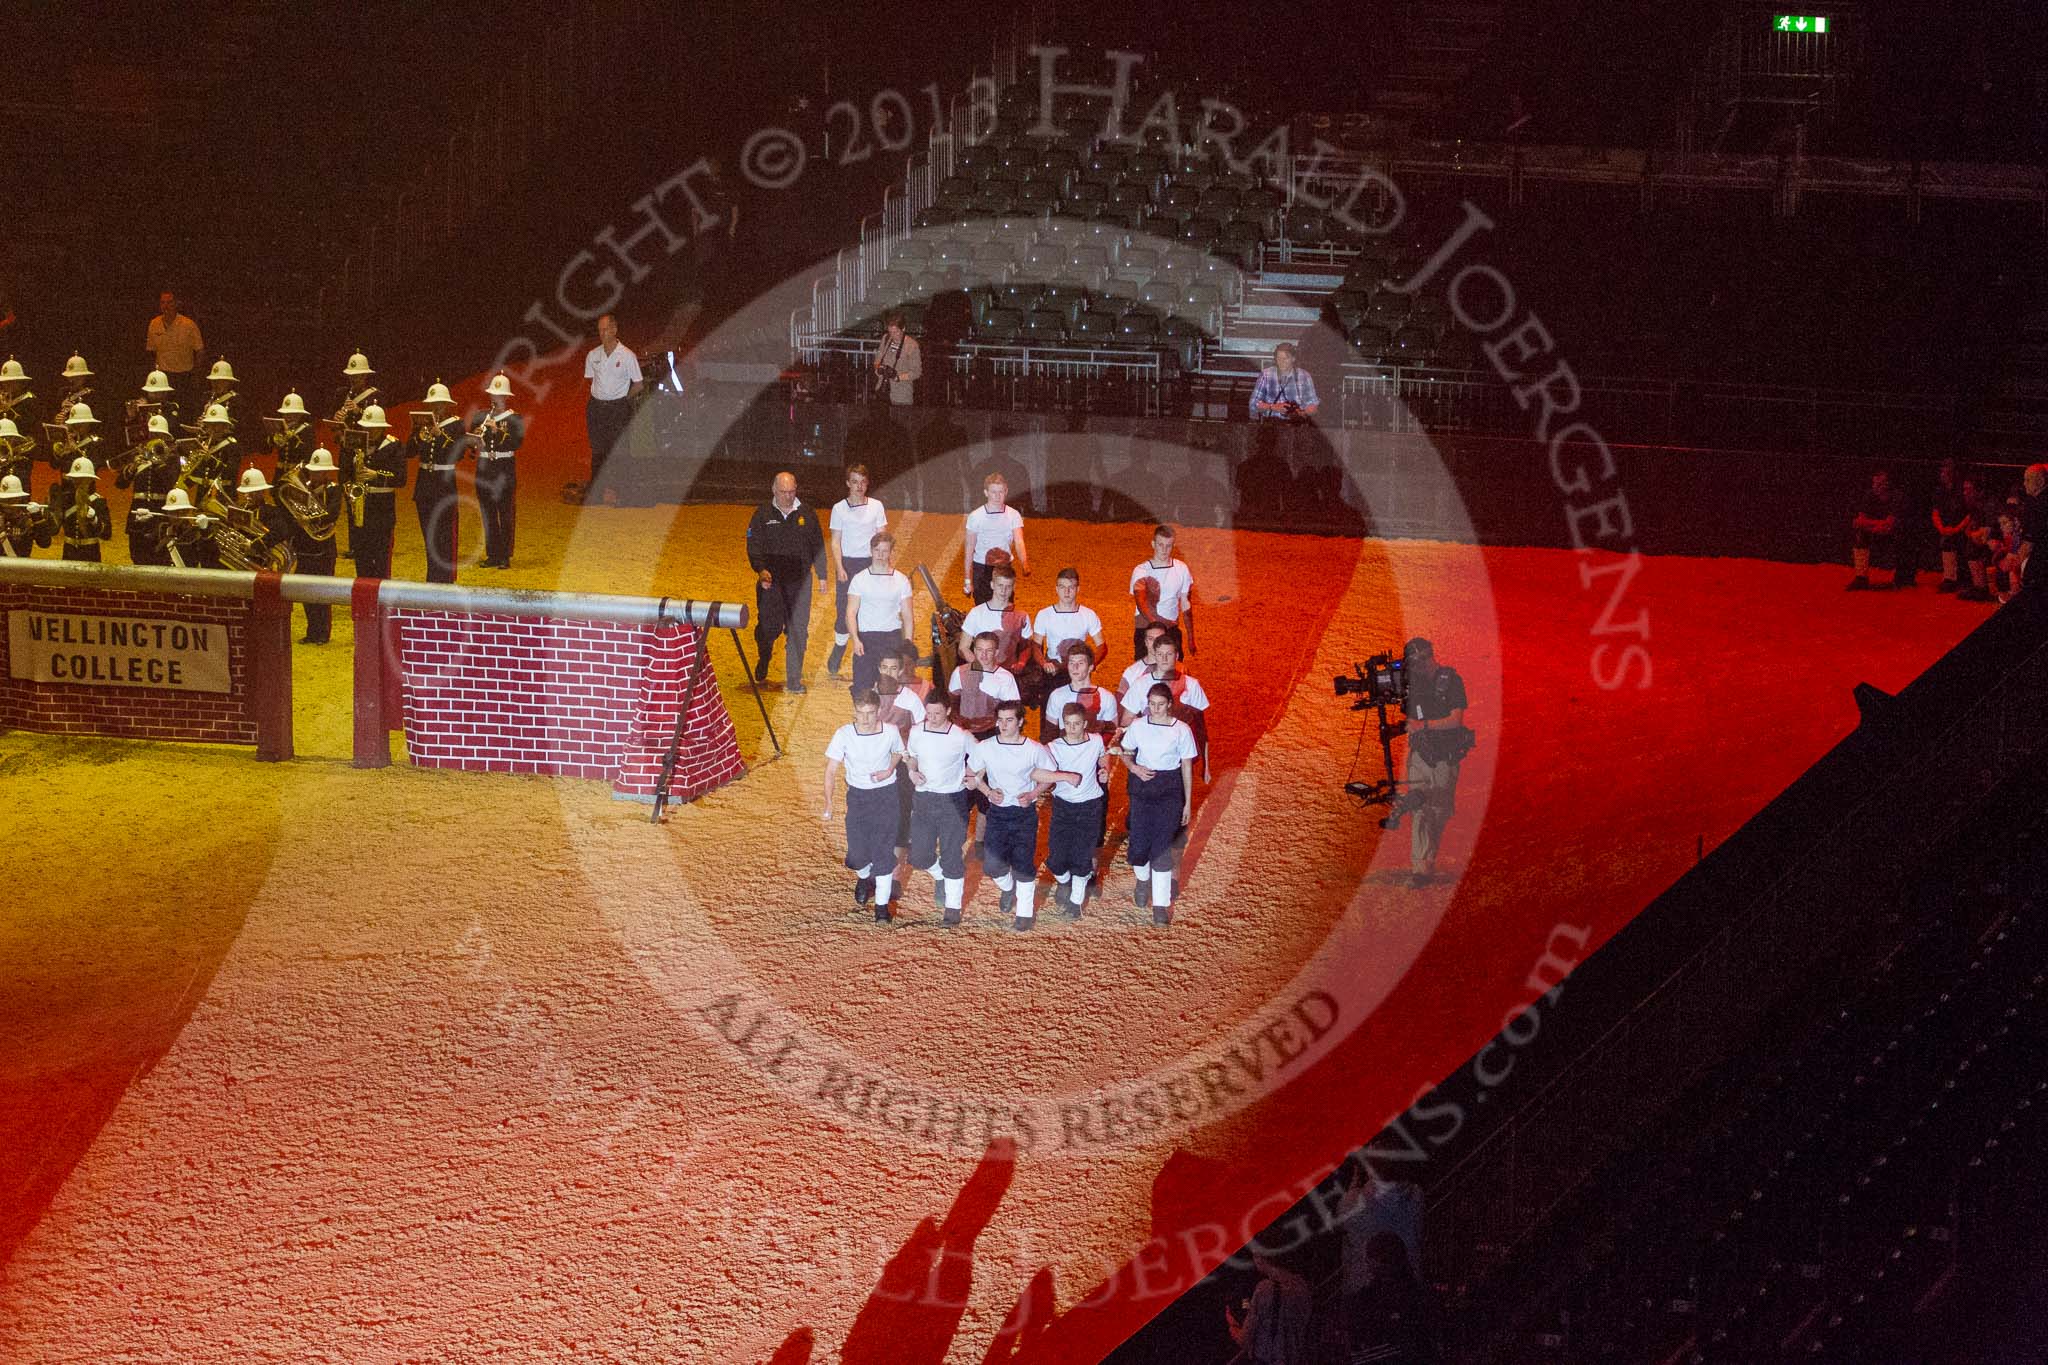 British Military Tournament 2013.
Earls Court,
London SW5,

United Kingdom,
on 06 December 2013 at 16:02, image #262